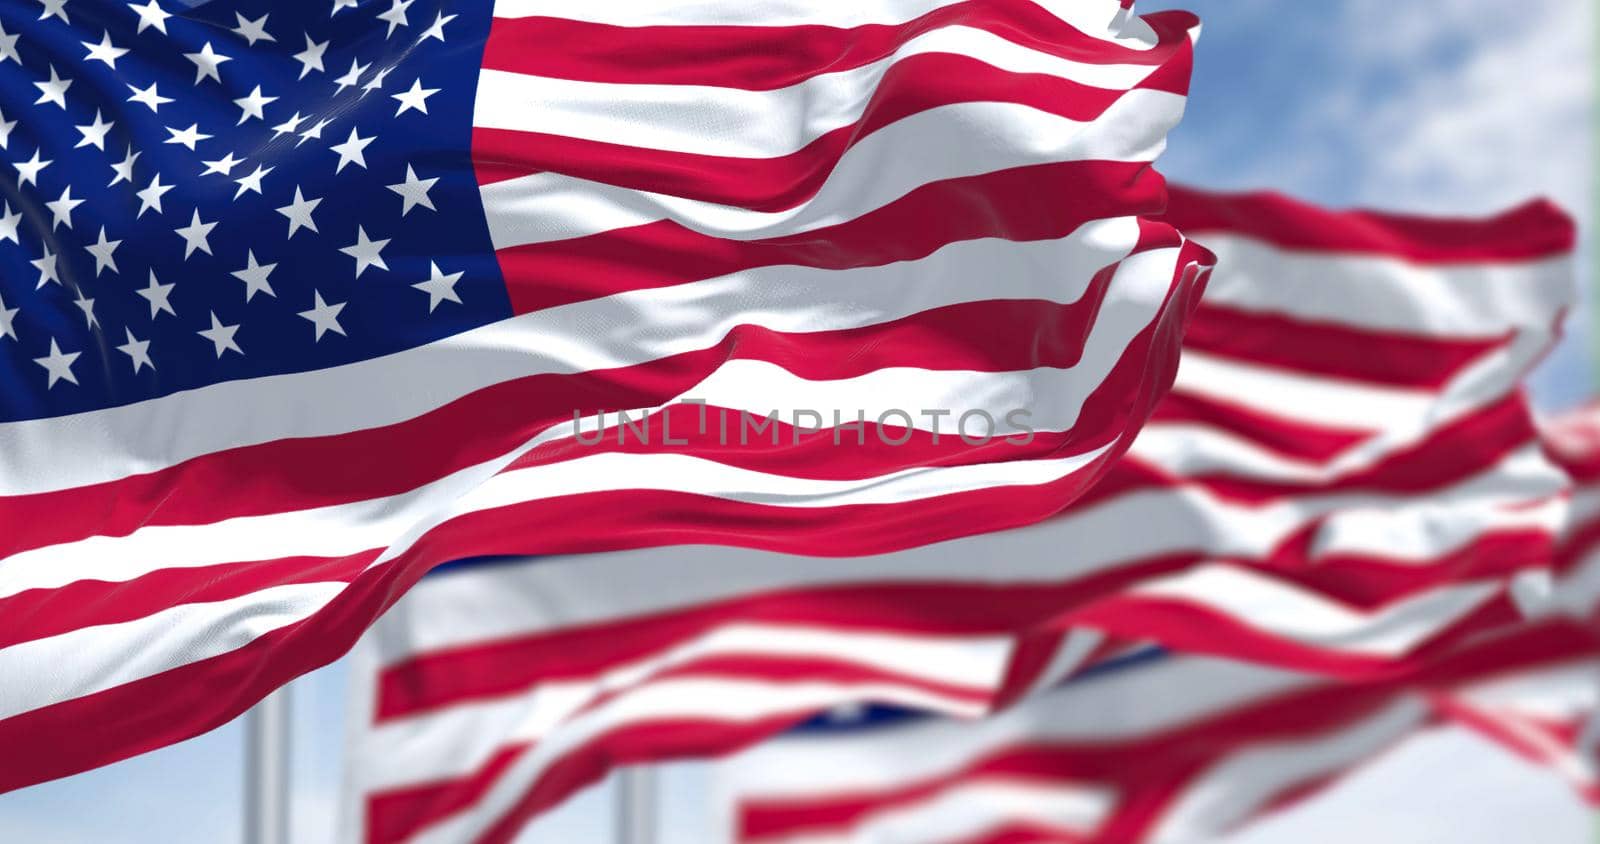 Three flags of the United States of America waving in the wind by rarrarorro